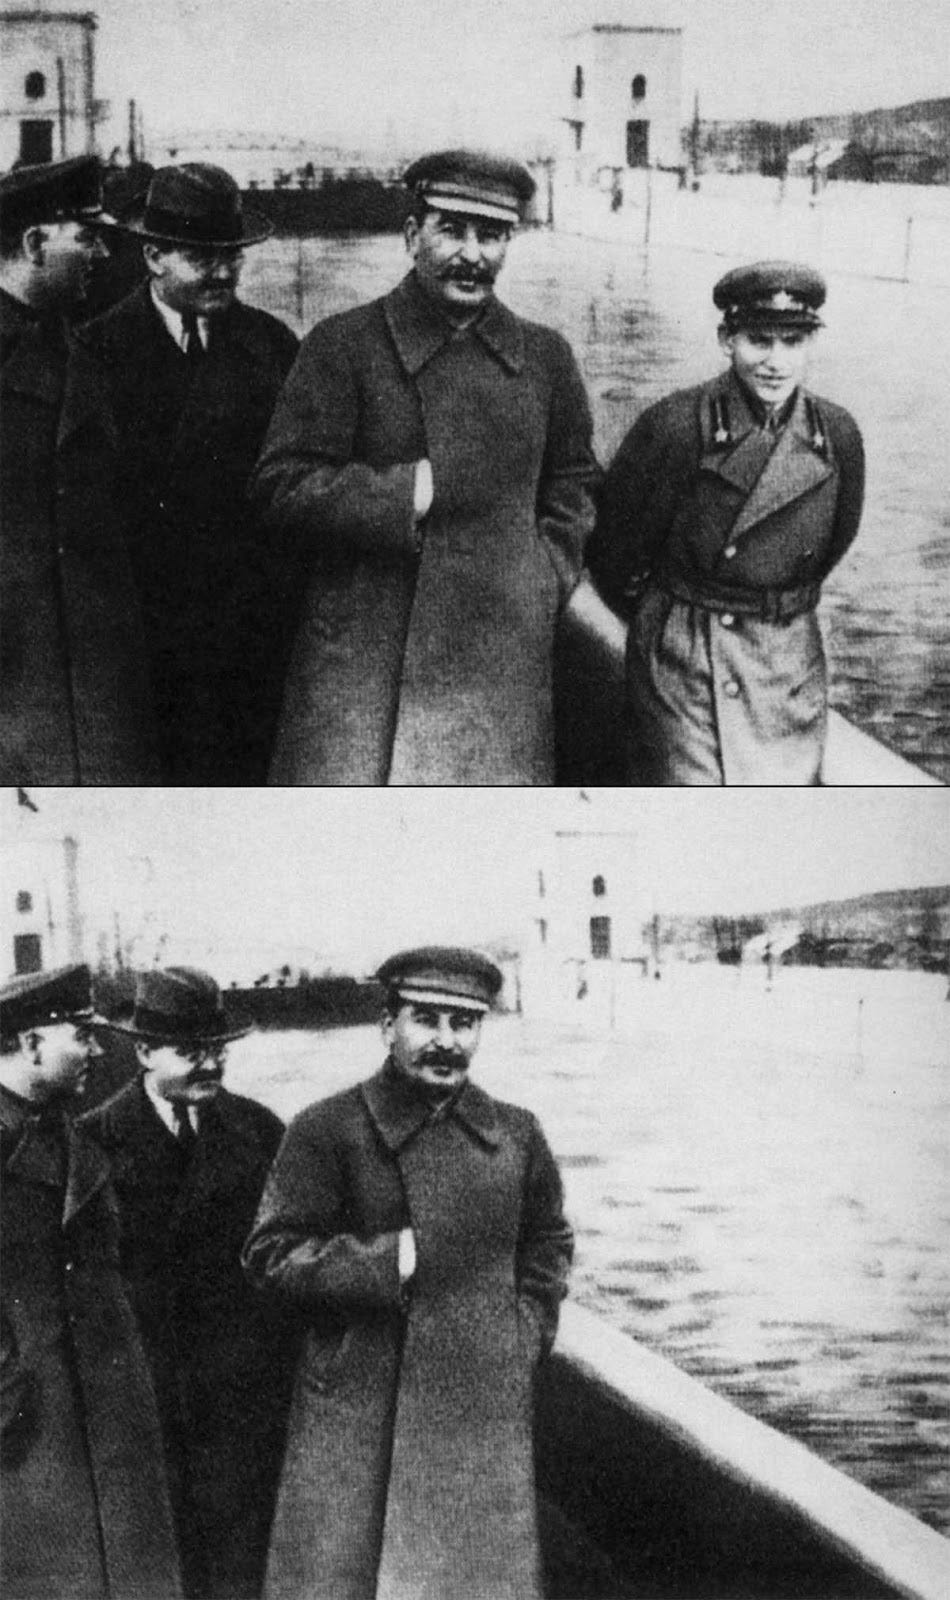 Nikolai Yezhov, pictured right of Stalin, was later removed from this photograph at the Moscow Canal.